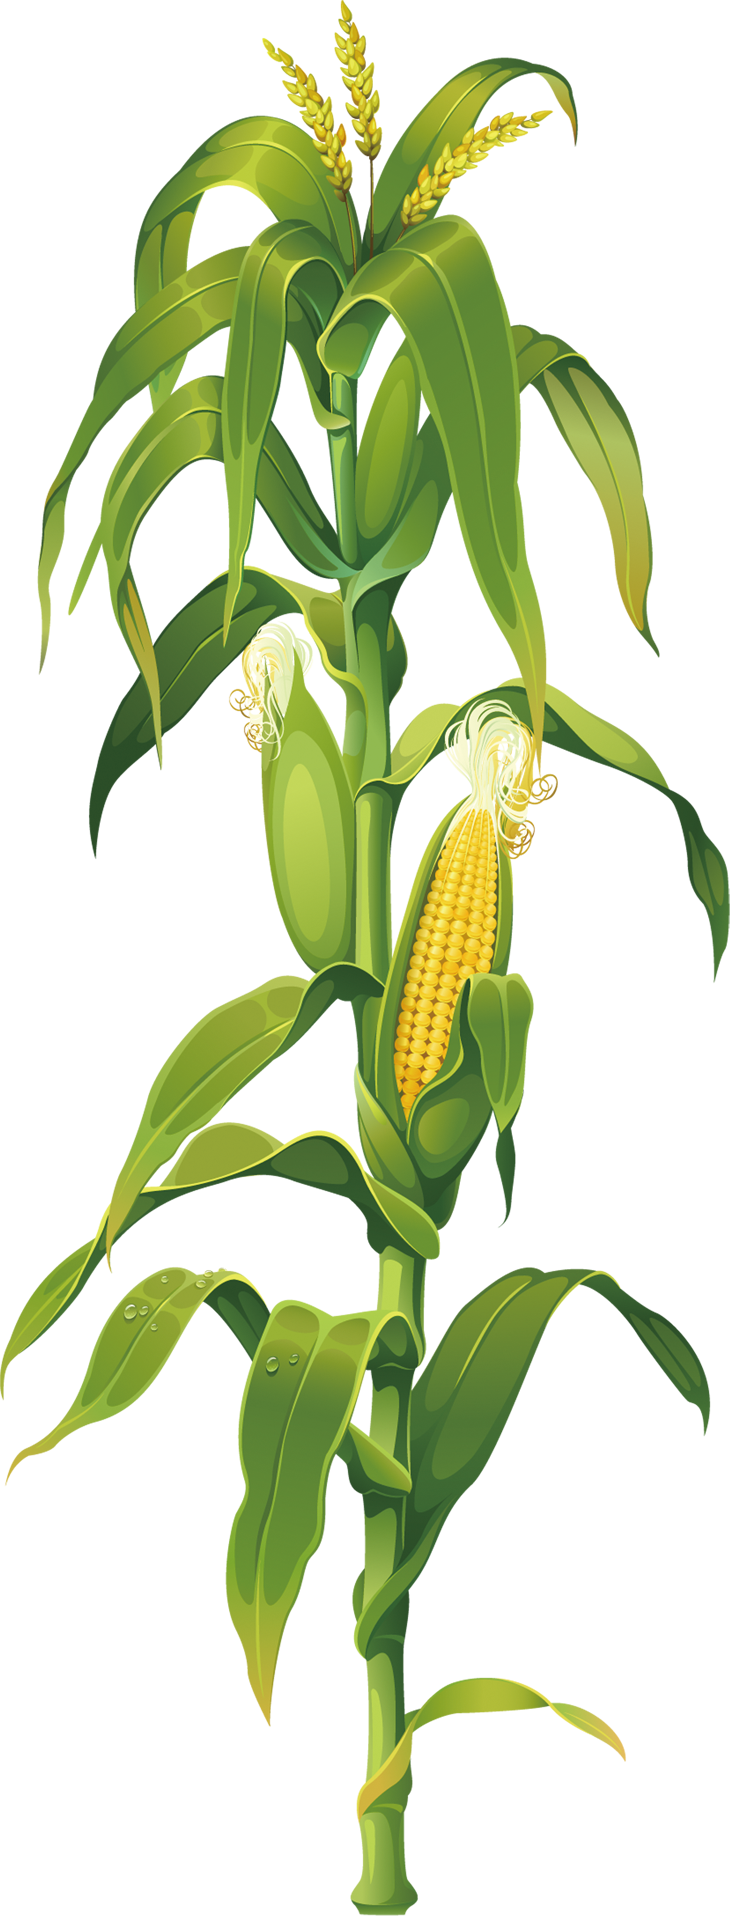 maize-corn-on-the-cob-drawing-plant-clip-art-corn-png-download-730-1916-free-transparent